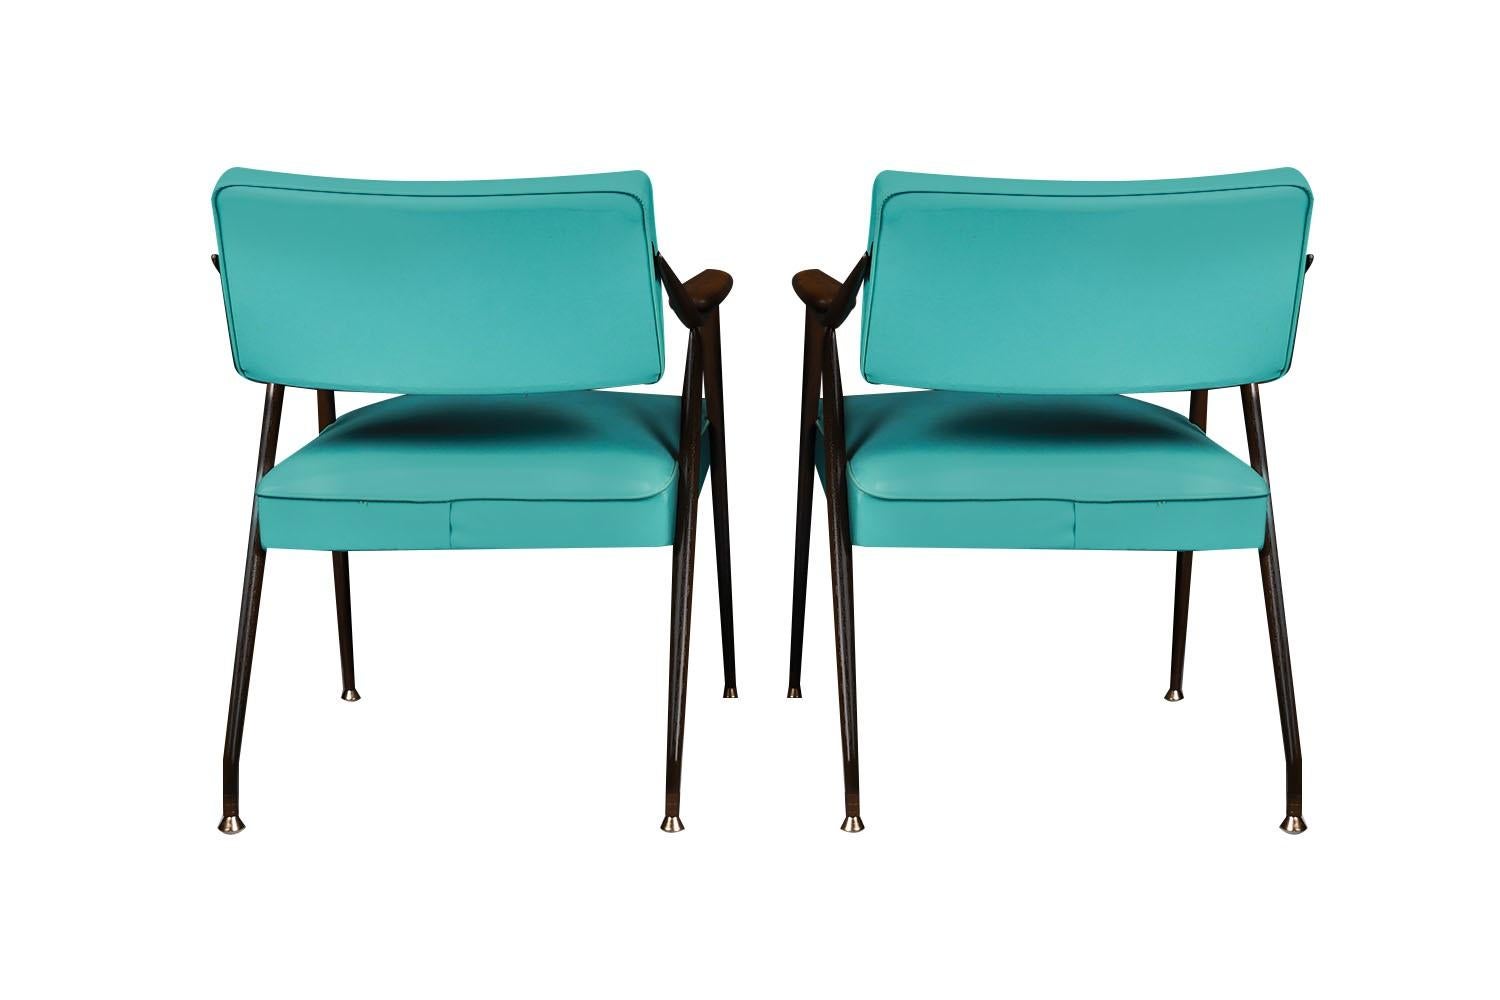 American Mid-Century Modern Blue Pair Armchairs Viko Baumritter 1959 USA For Sale